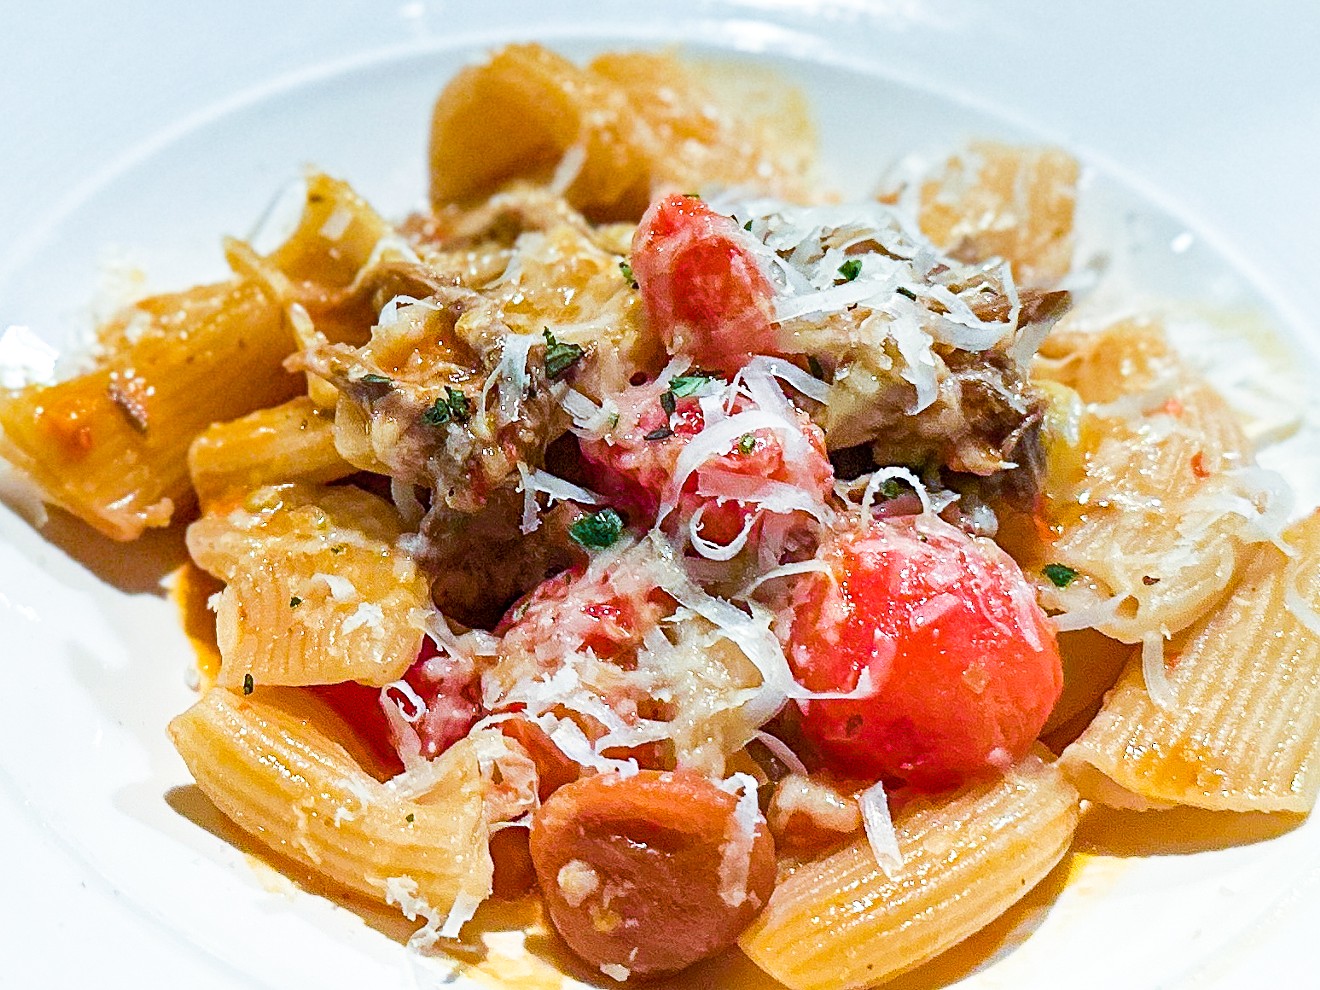 Lynae Fearing's discovery from the isle of Capri: rigatoni Genovese, with alla Genovese, cherry tomatoes, Calabrian chili and Grana Padano.